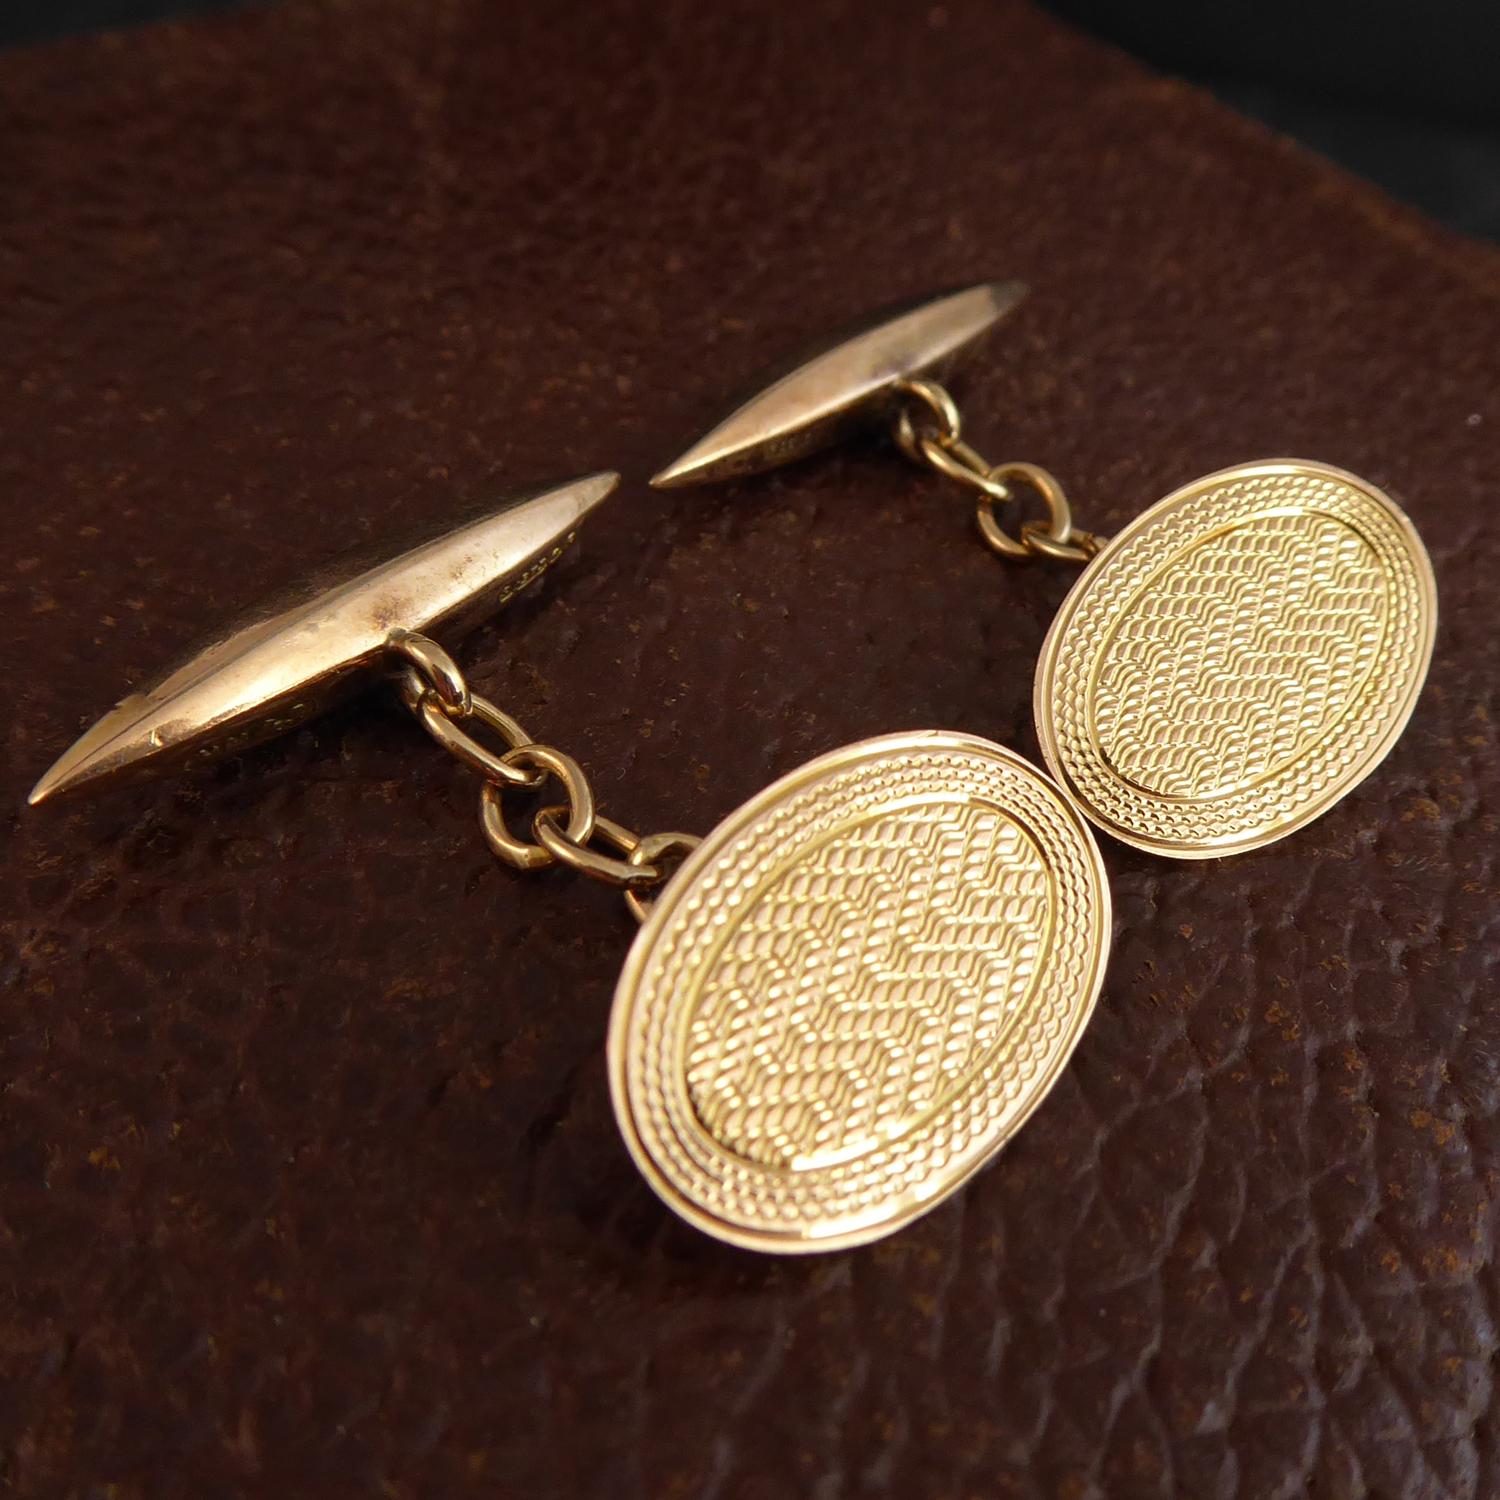 Men's Art Deco Gold Cufflinks, Engine Turned Engraving, Oval Fronts with Torpedo Backs